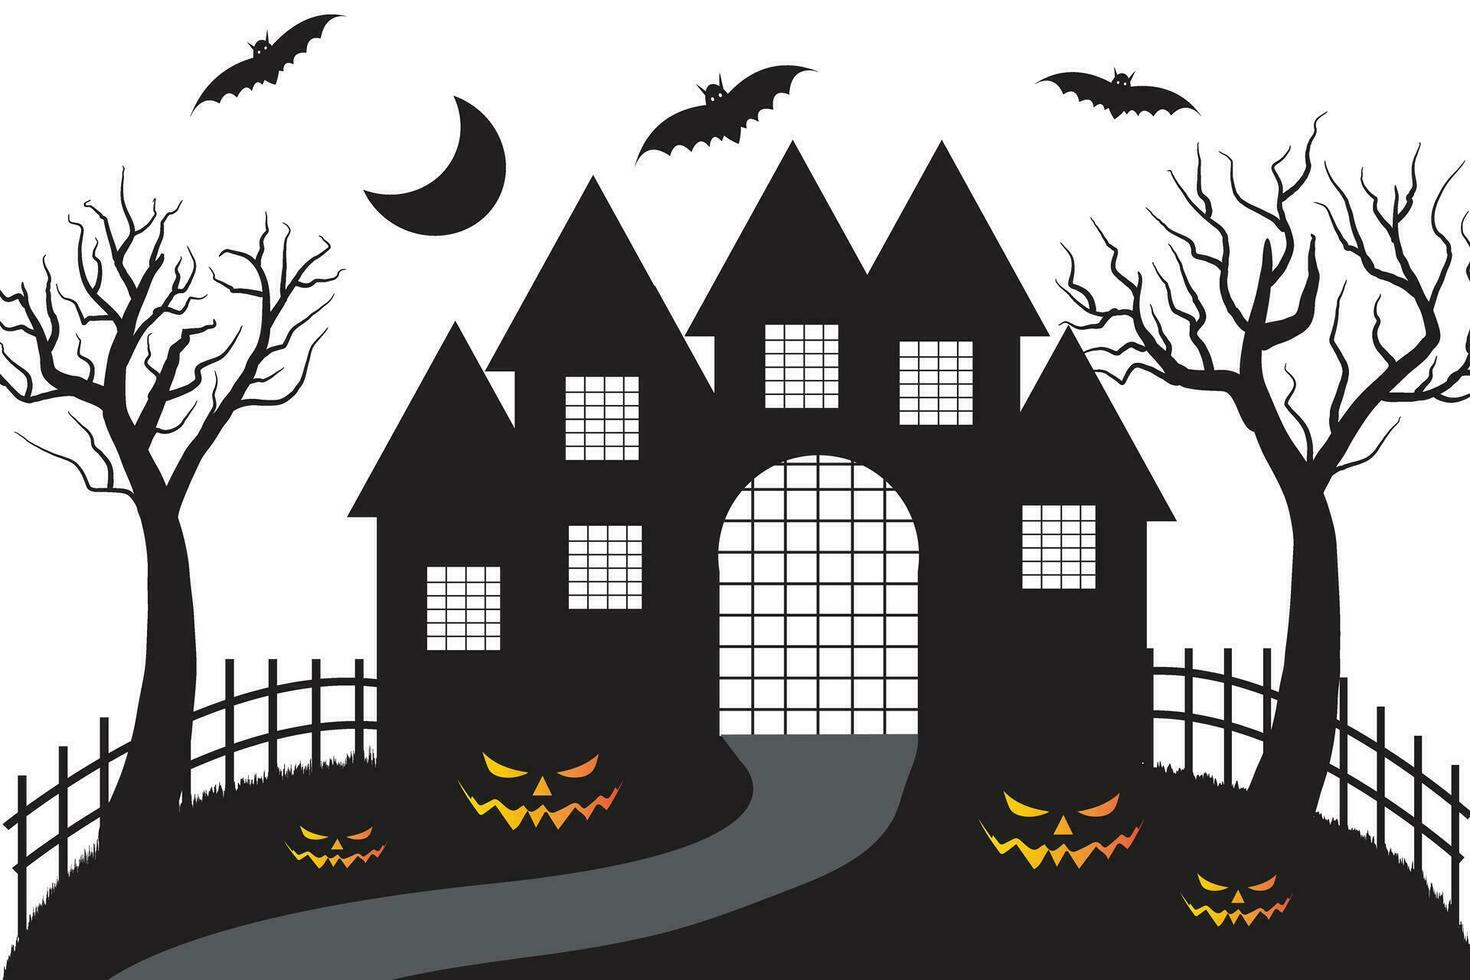 Halloween Horror Castle haunted house building silhouette vector,Black and white bat and ghost Spooky house, Scary Night Party 31 October illustration theme,trees Pumpkins tombs Witch Moon crosses vector